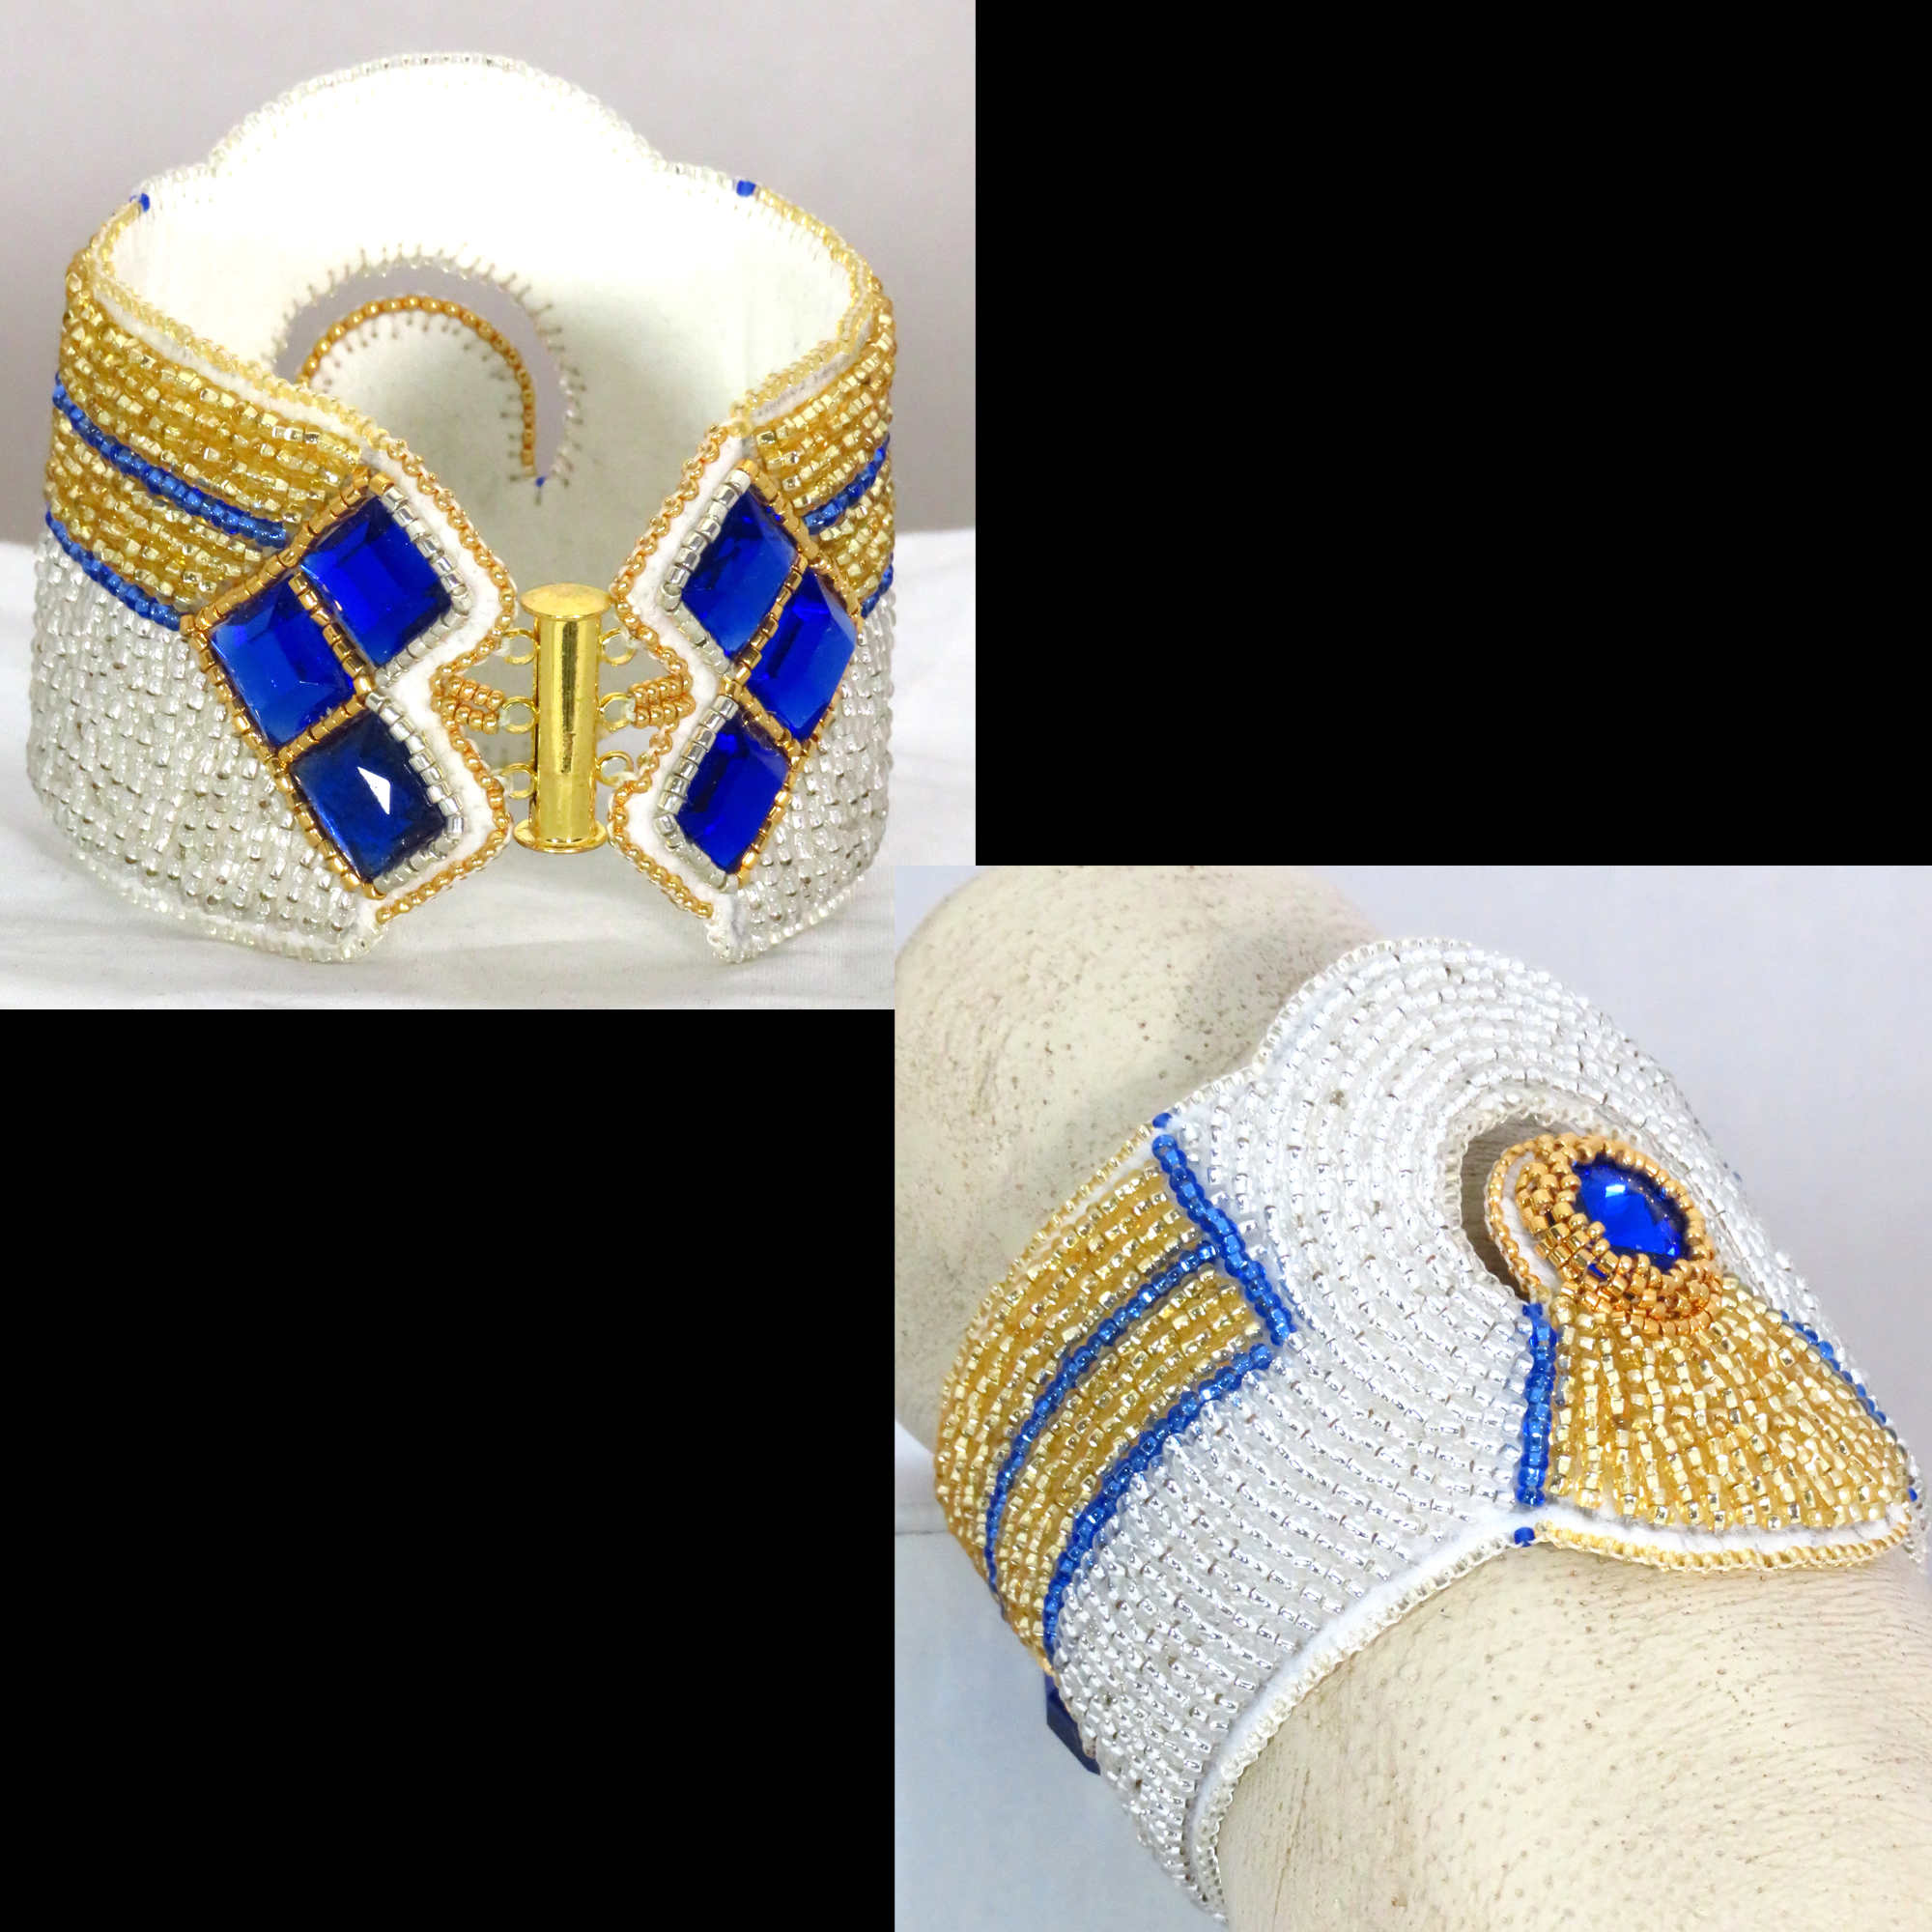 Art Deco bead embroidered bracelet in gold, siver, and sapphire blue by Bonnie Van Hall